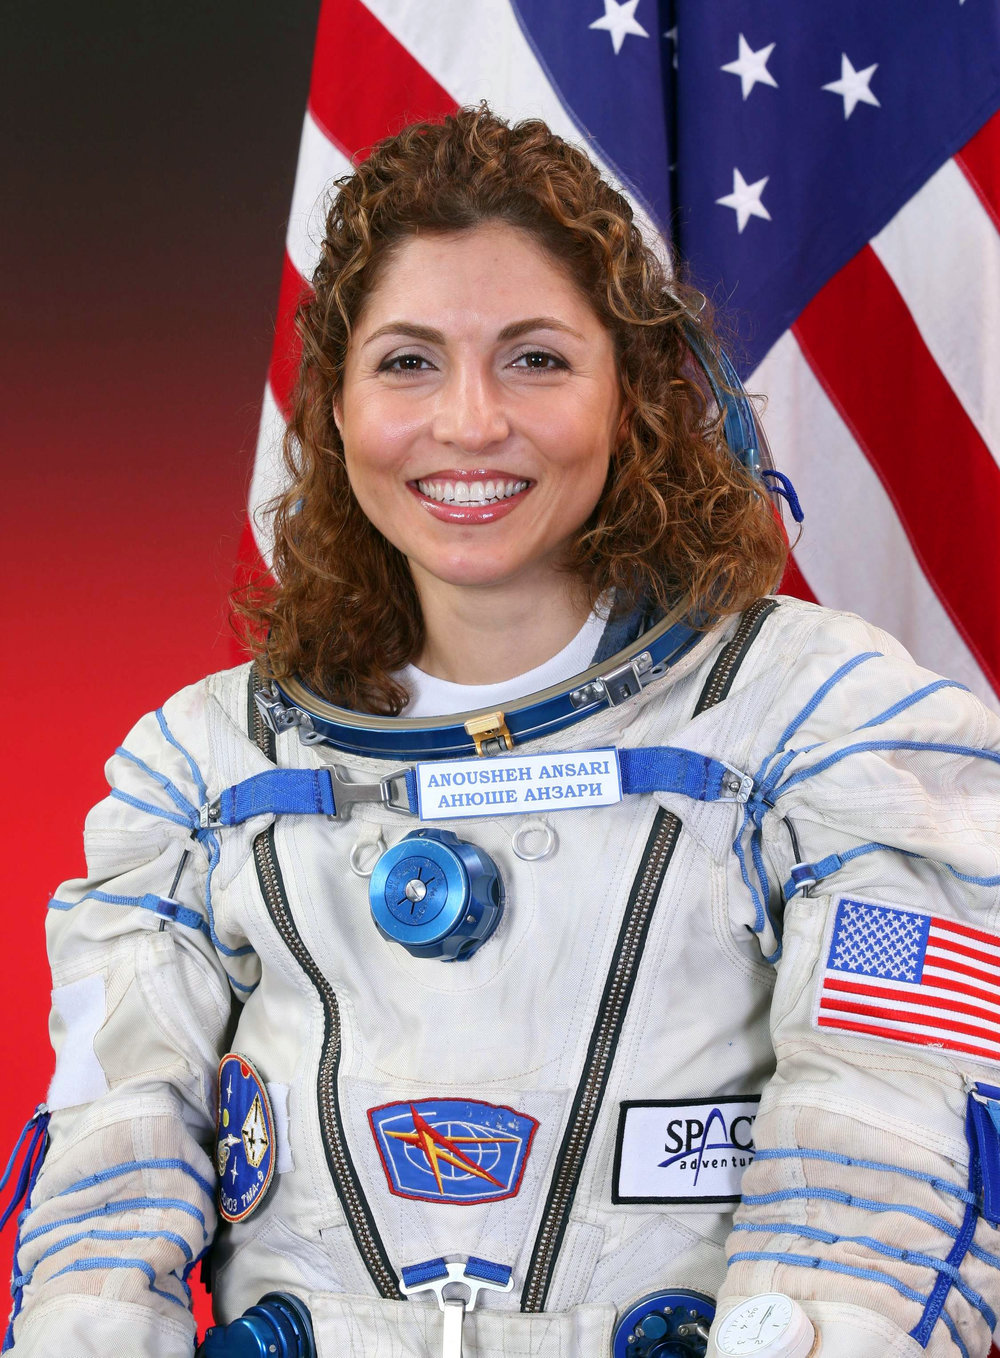 Anousheh Ansari, first Iranian woman in space, fourth overall self-funded space traveler, and the first self-funded woman to fly to the International Space Station.